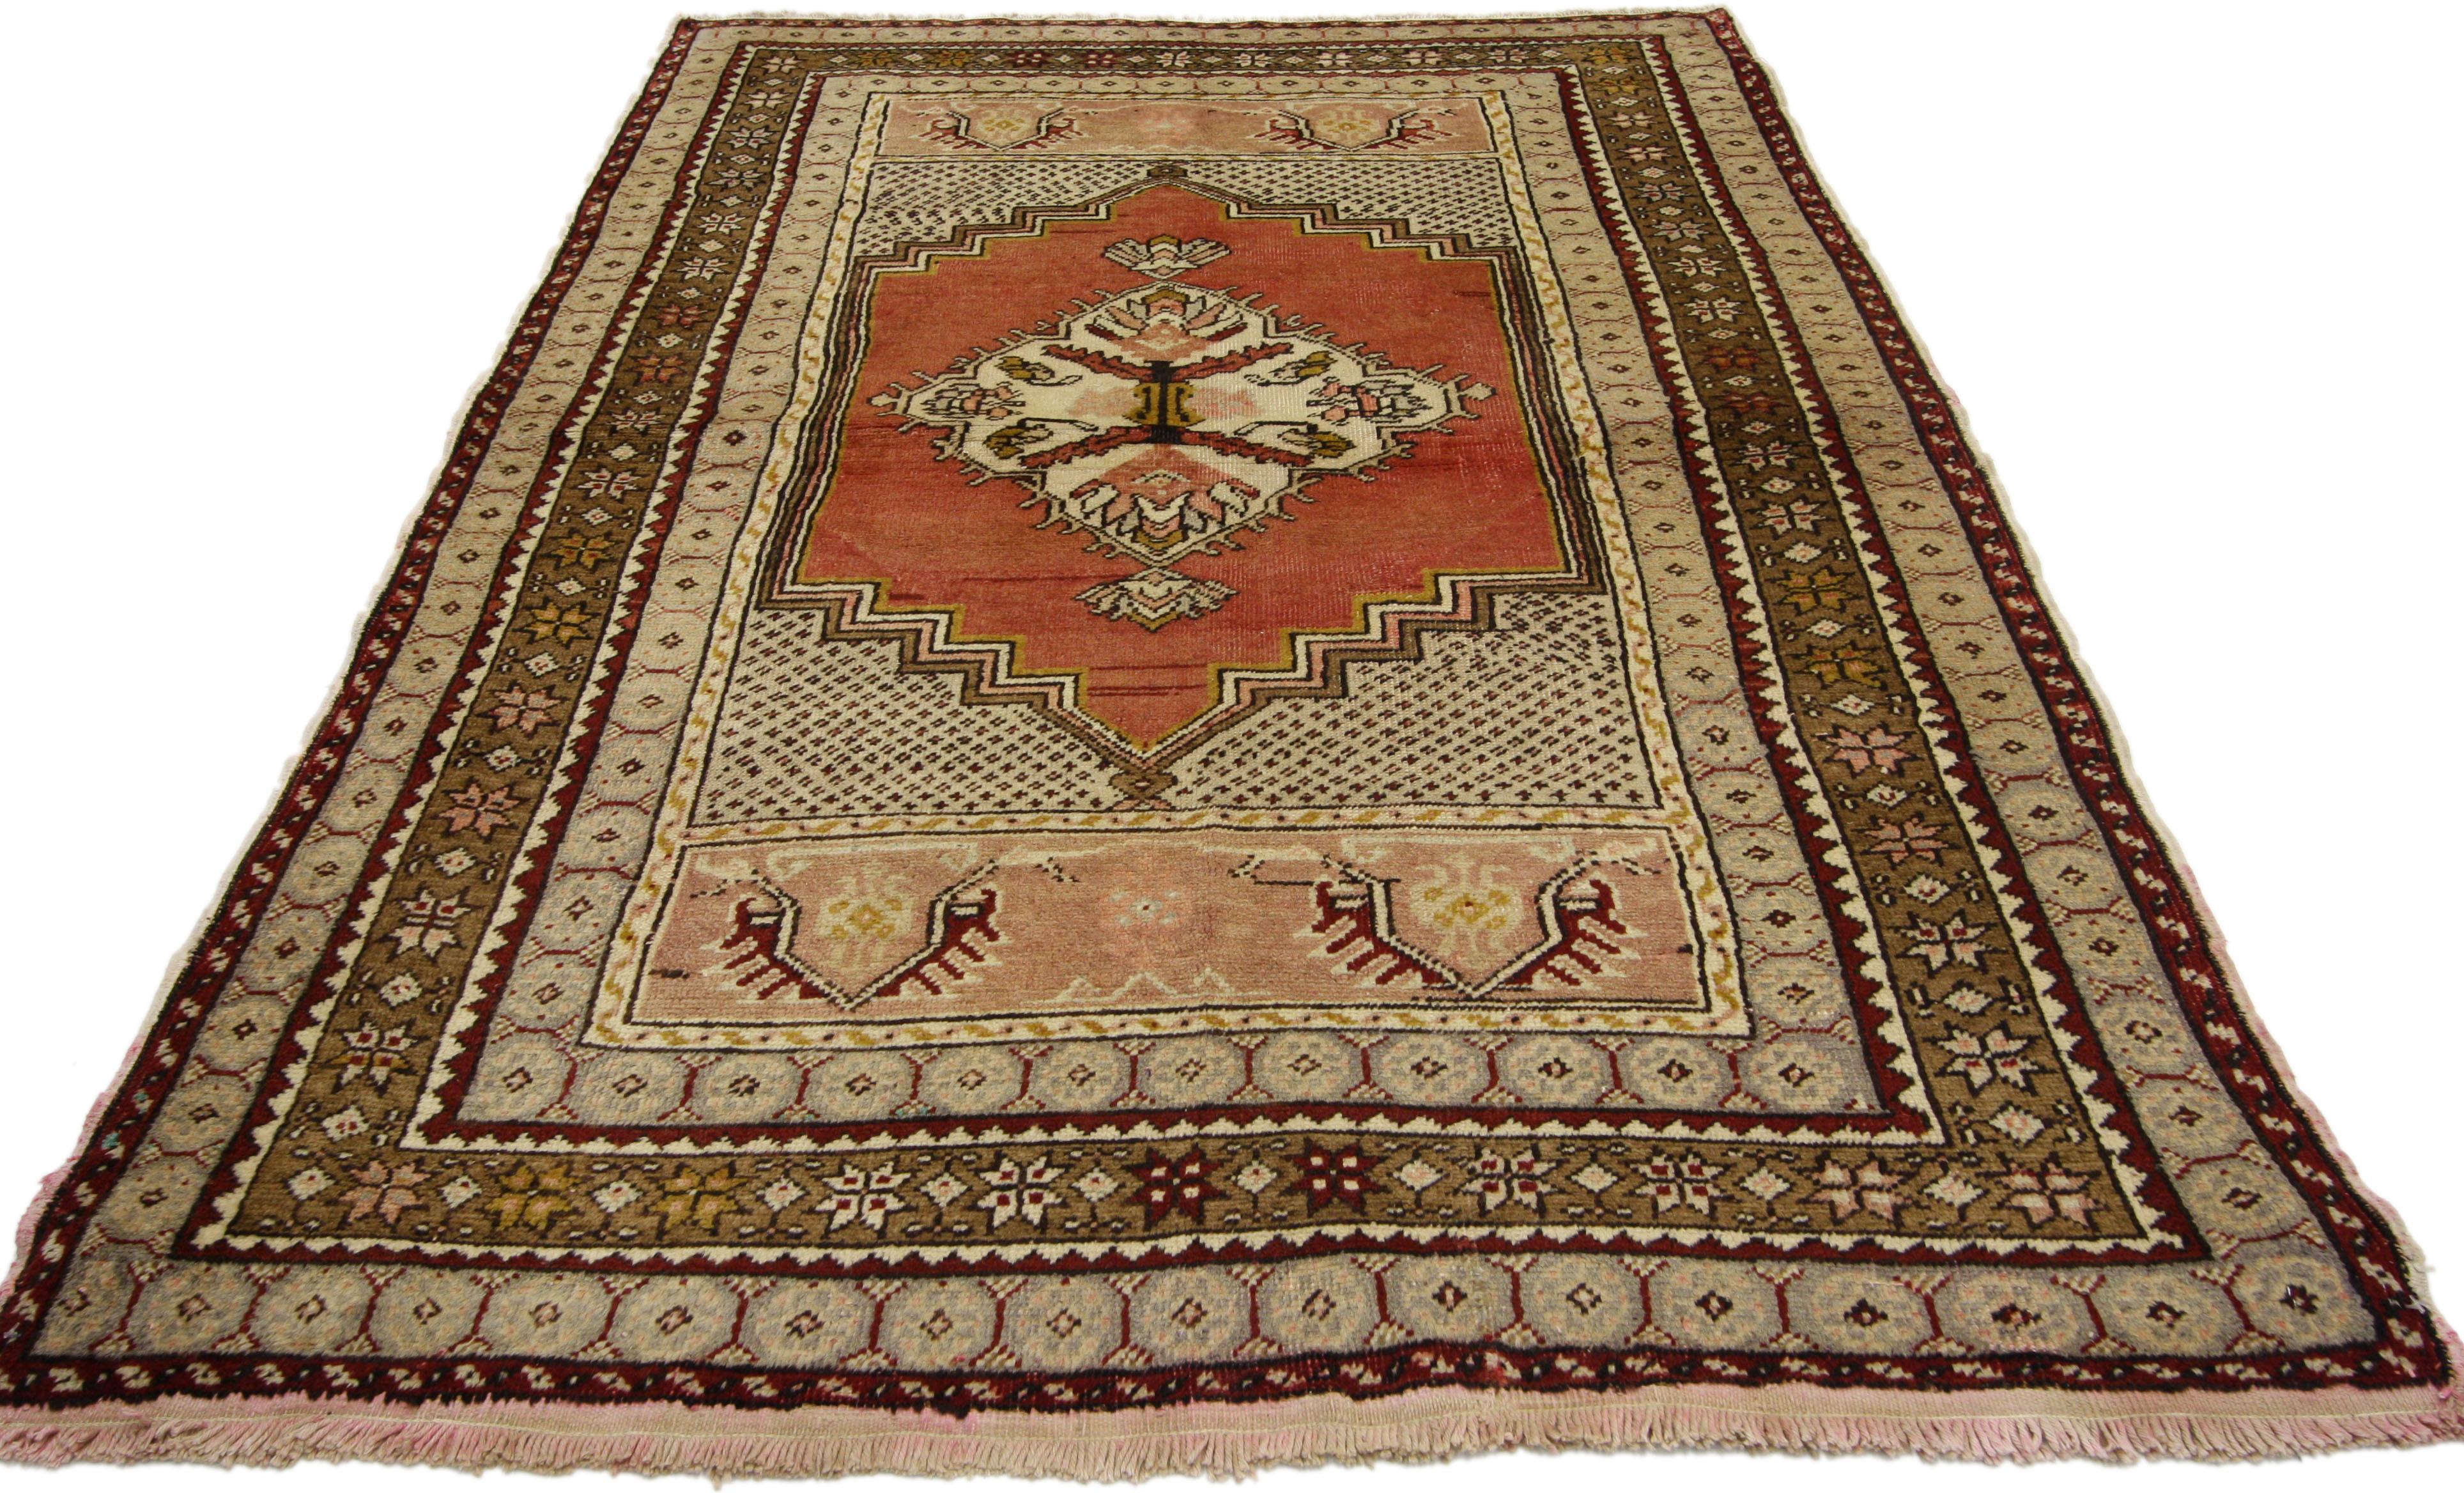 73847, vintage Turkish Oushak rug, entry or foyer rug 03'10 x 05'08. This vintage. Turkish Oushak rug features a modern traditional style. Immersed in Anatolian history and refined colors, this vintage Turkish Oushak rug combines simplicity with